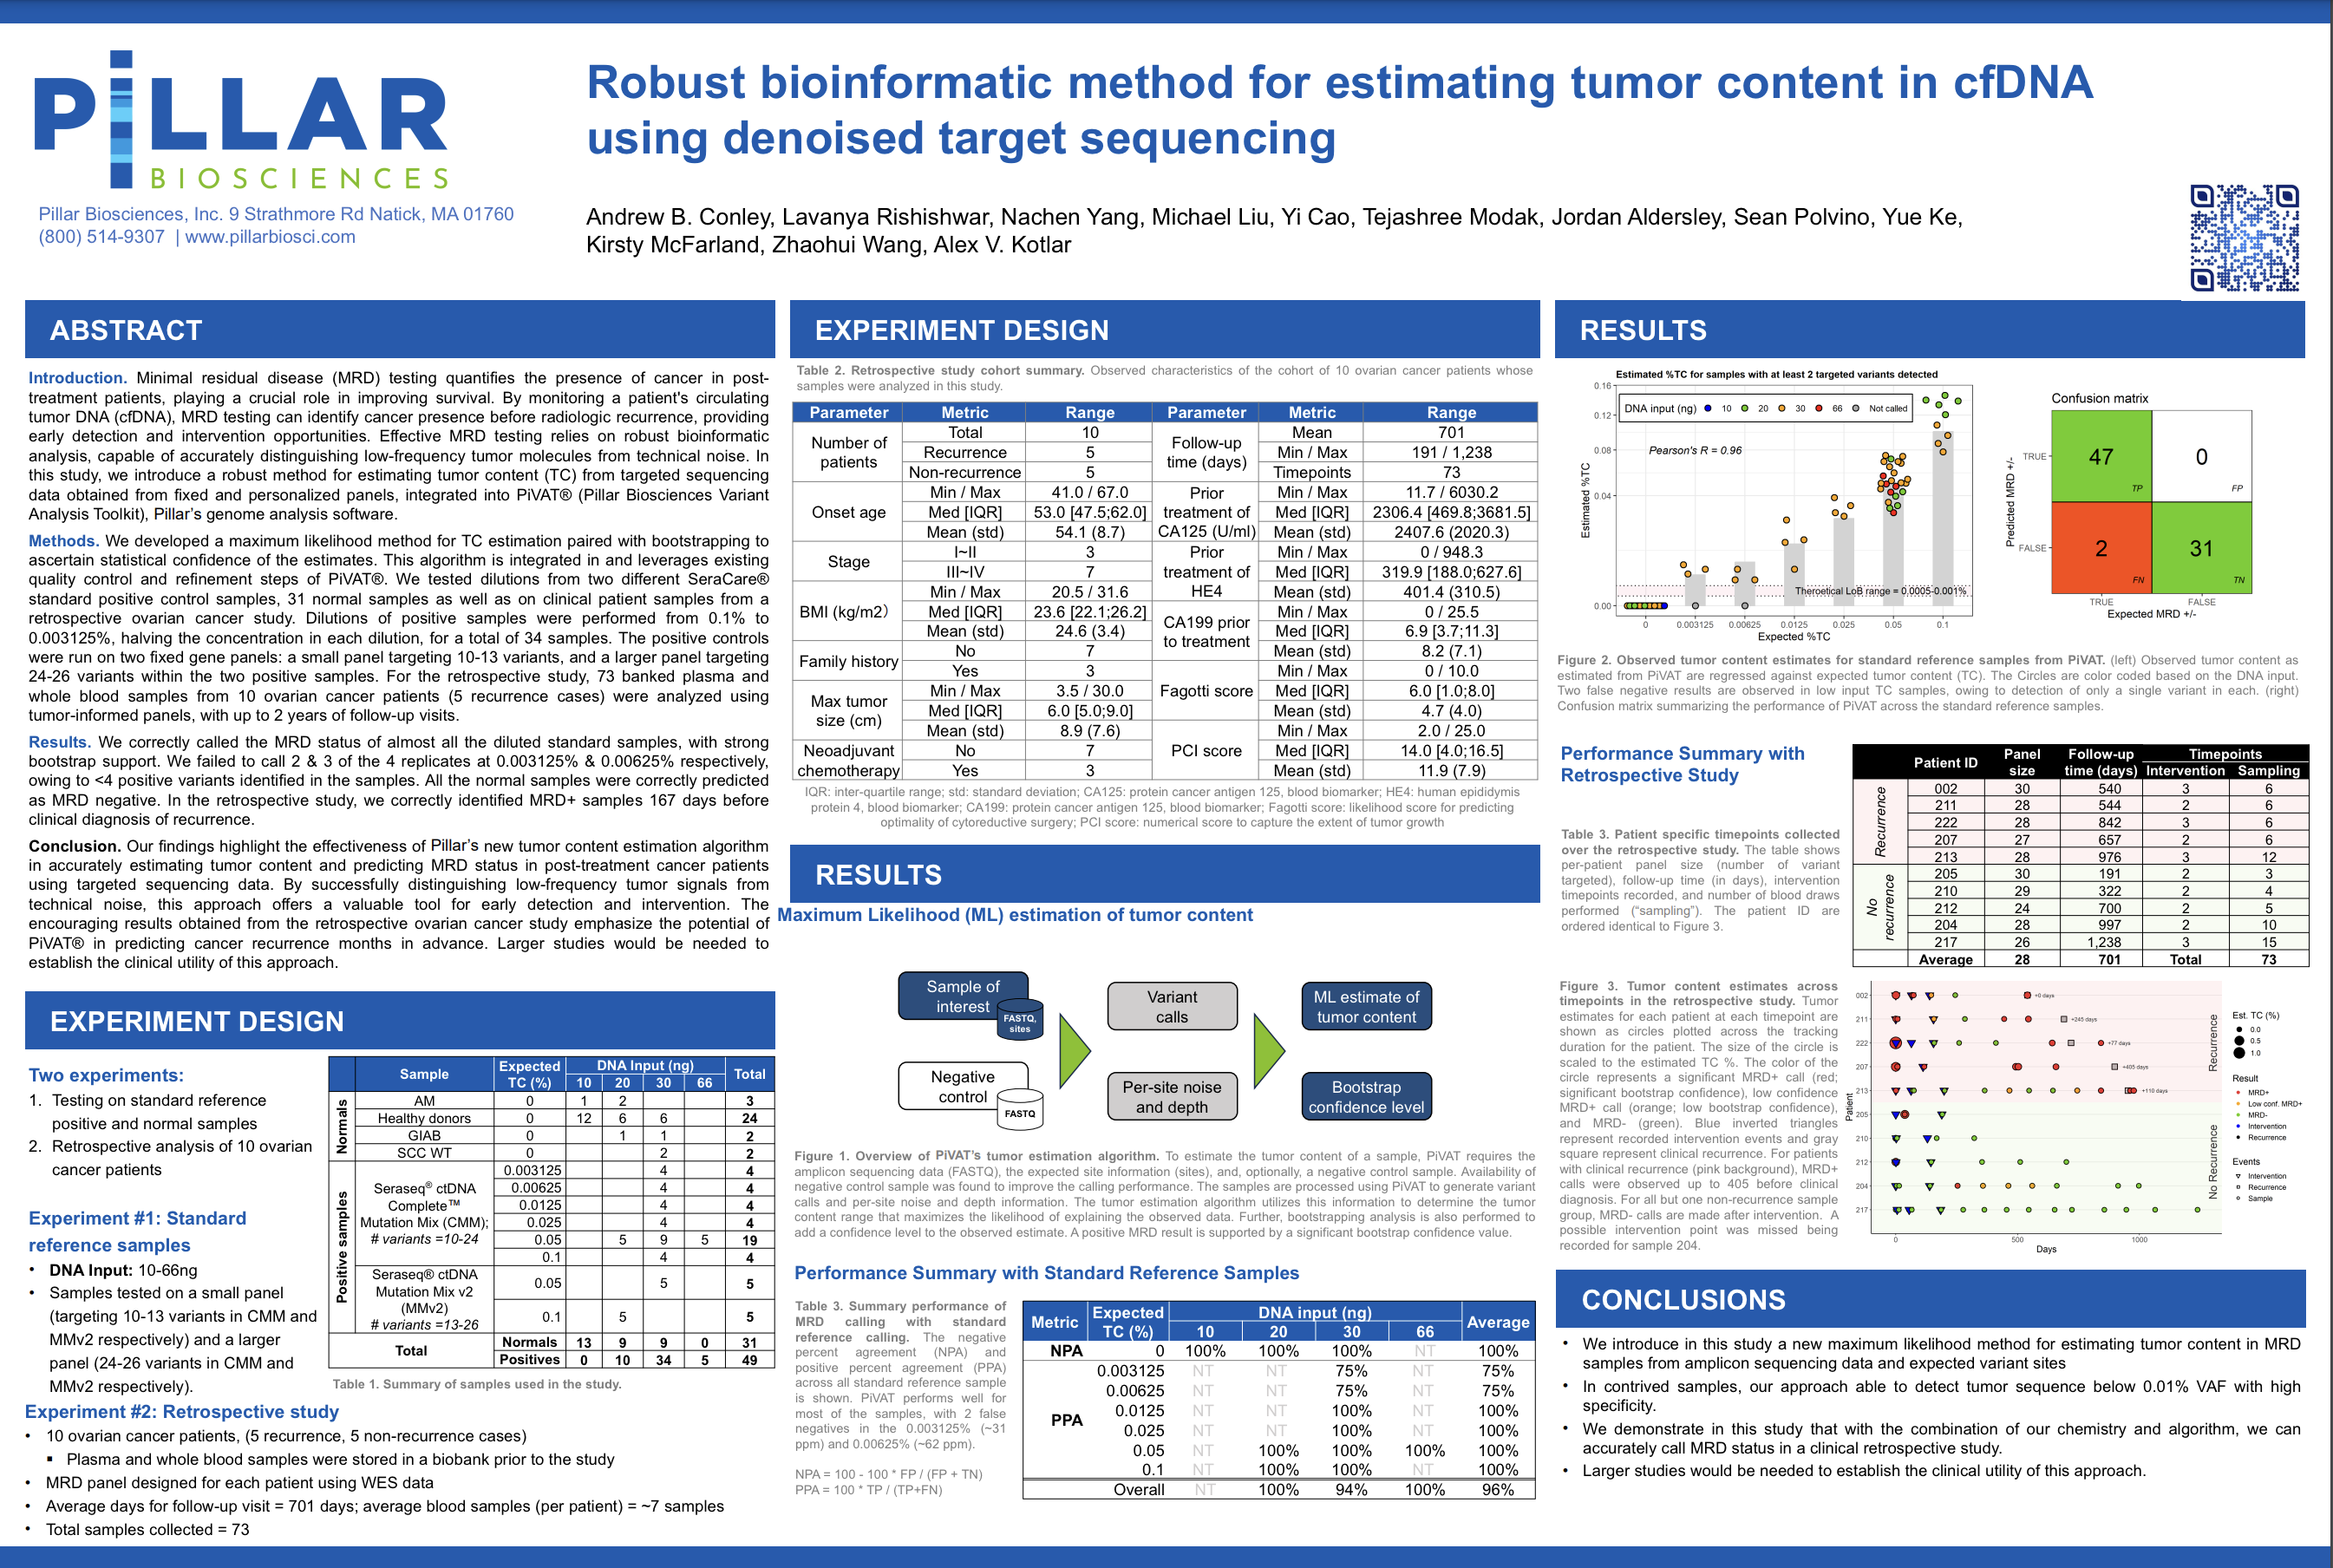 2023 AMP Conley et al Robust Bioinformatic Method for Estimating Tumor Content in cfDNA Using Denoised Target Sequencing